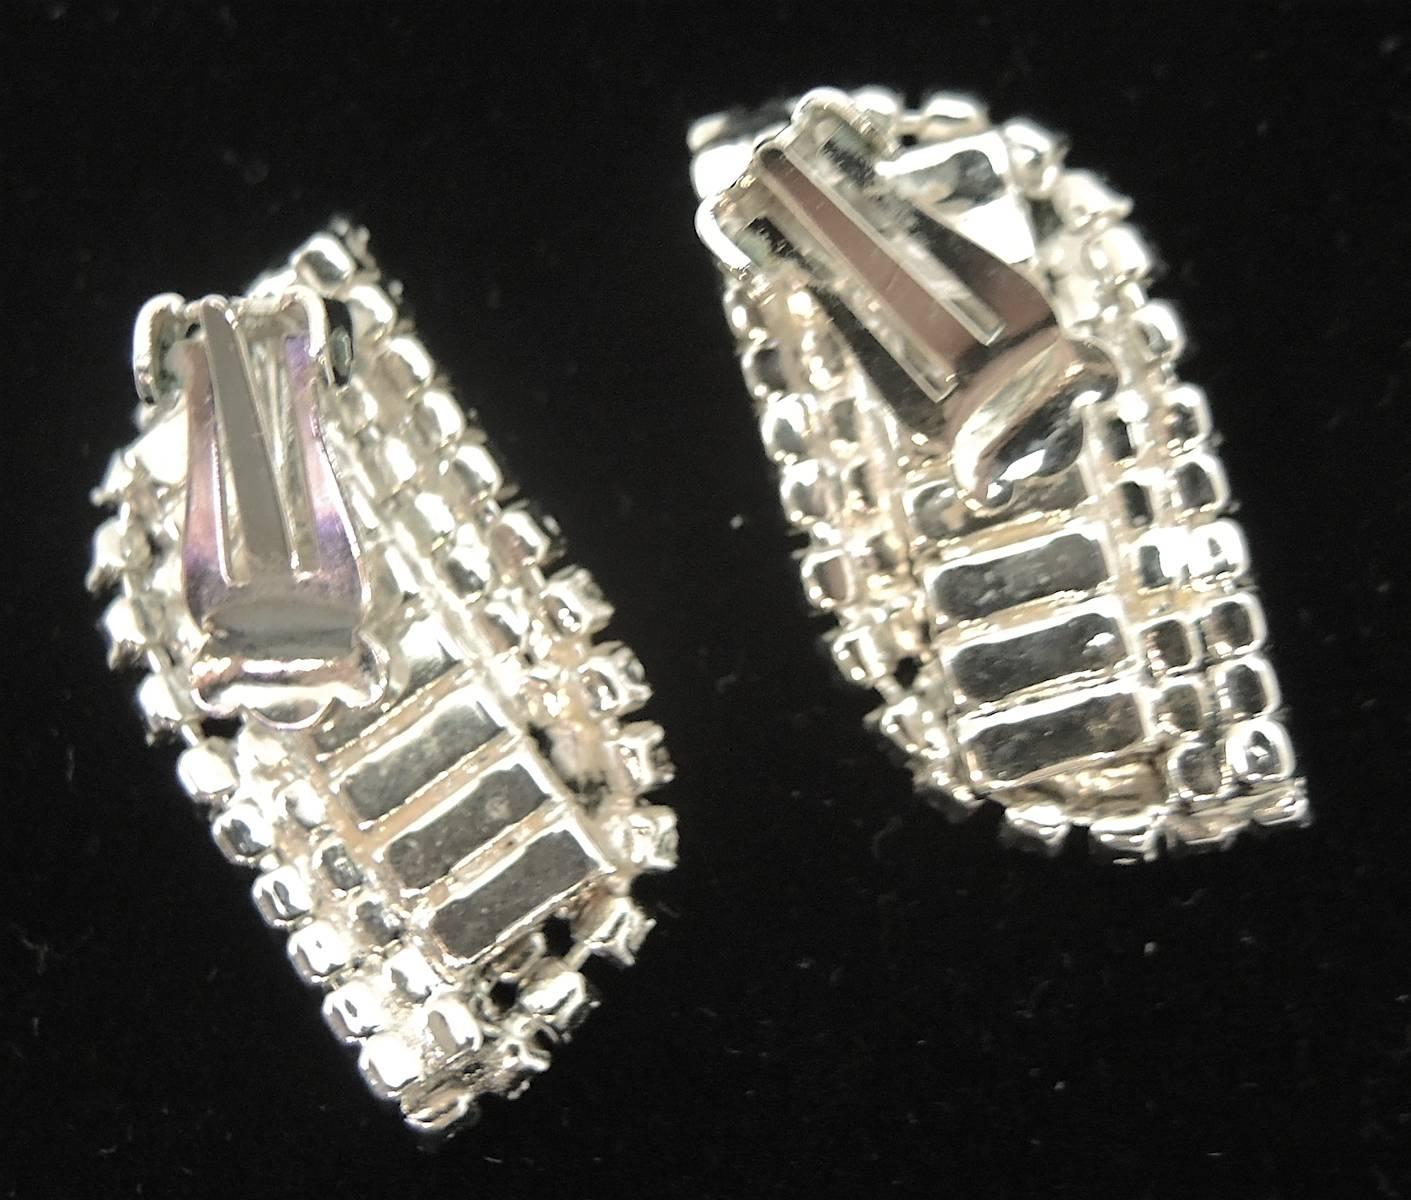 These vintage clip earrings have a row of baguette rhinestones in the center with round rhinestones at the border. They have a leaf design and measure 1-1/2” x 3/8”. They are in a silver tone setting and are in excellent condition. 